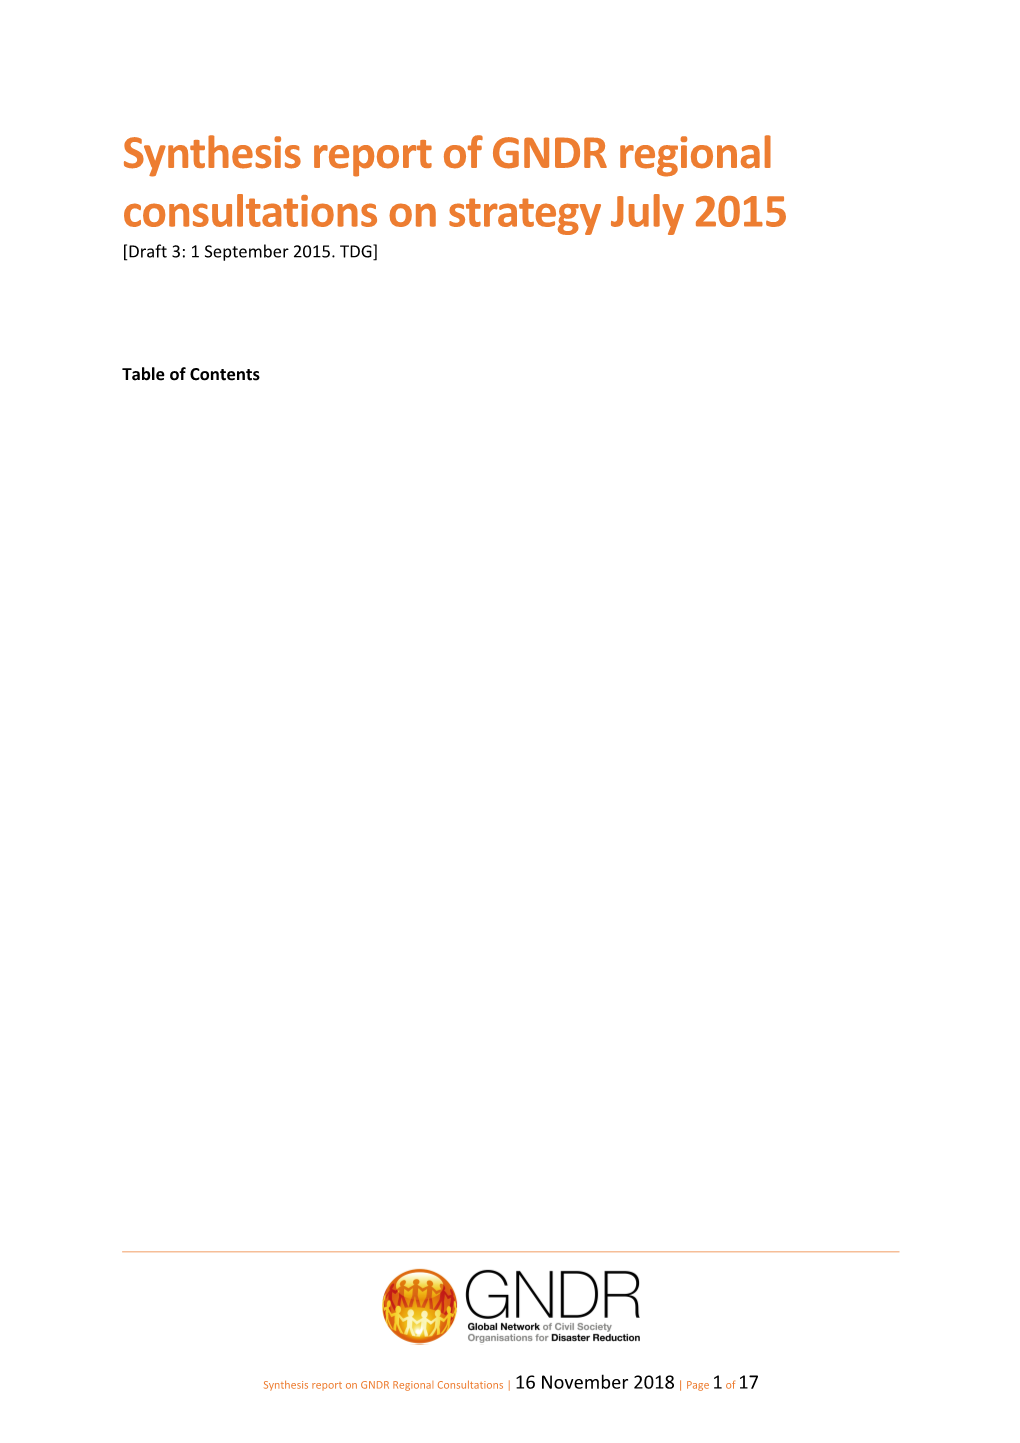 Synthesis Report of GNDR Regional Consultations on Strategy July 2015